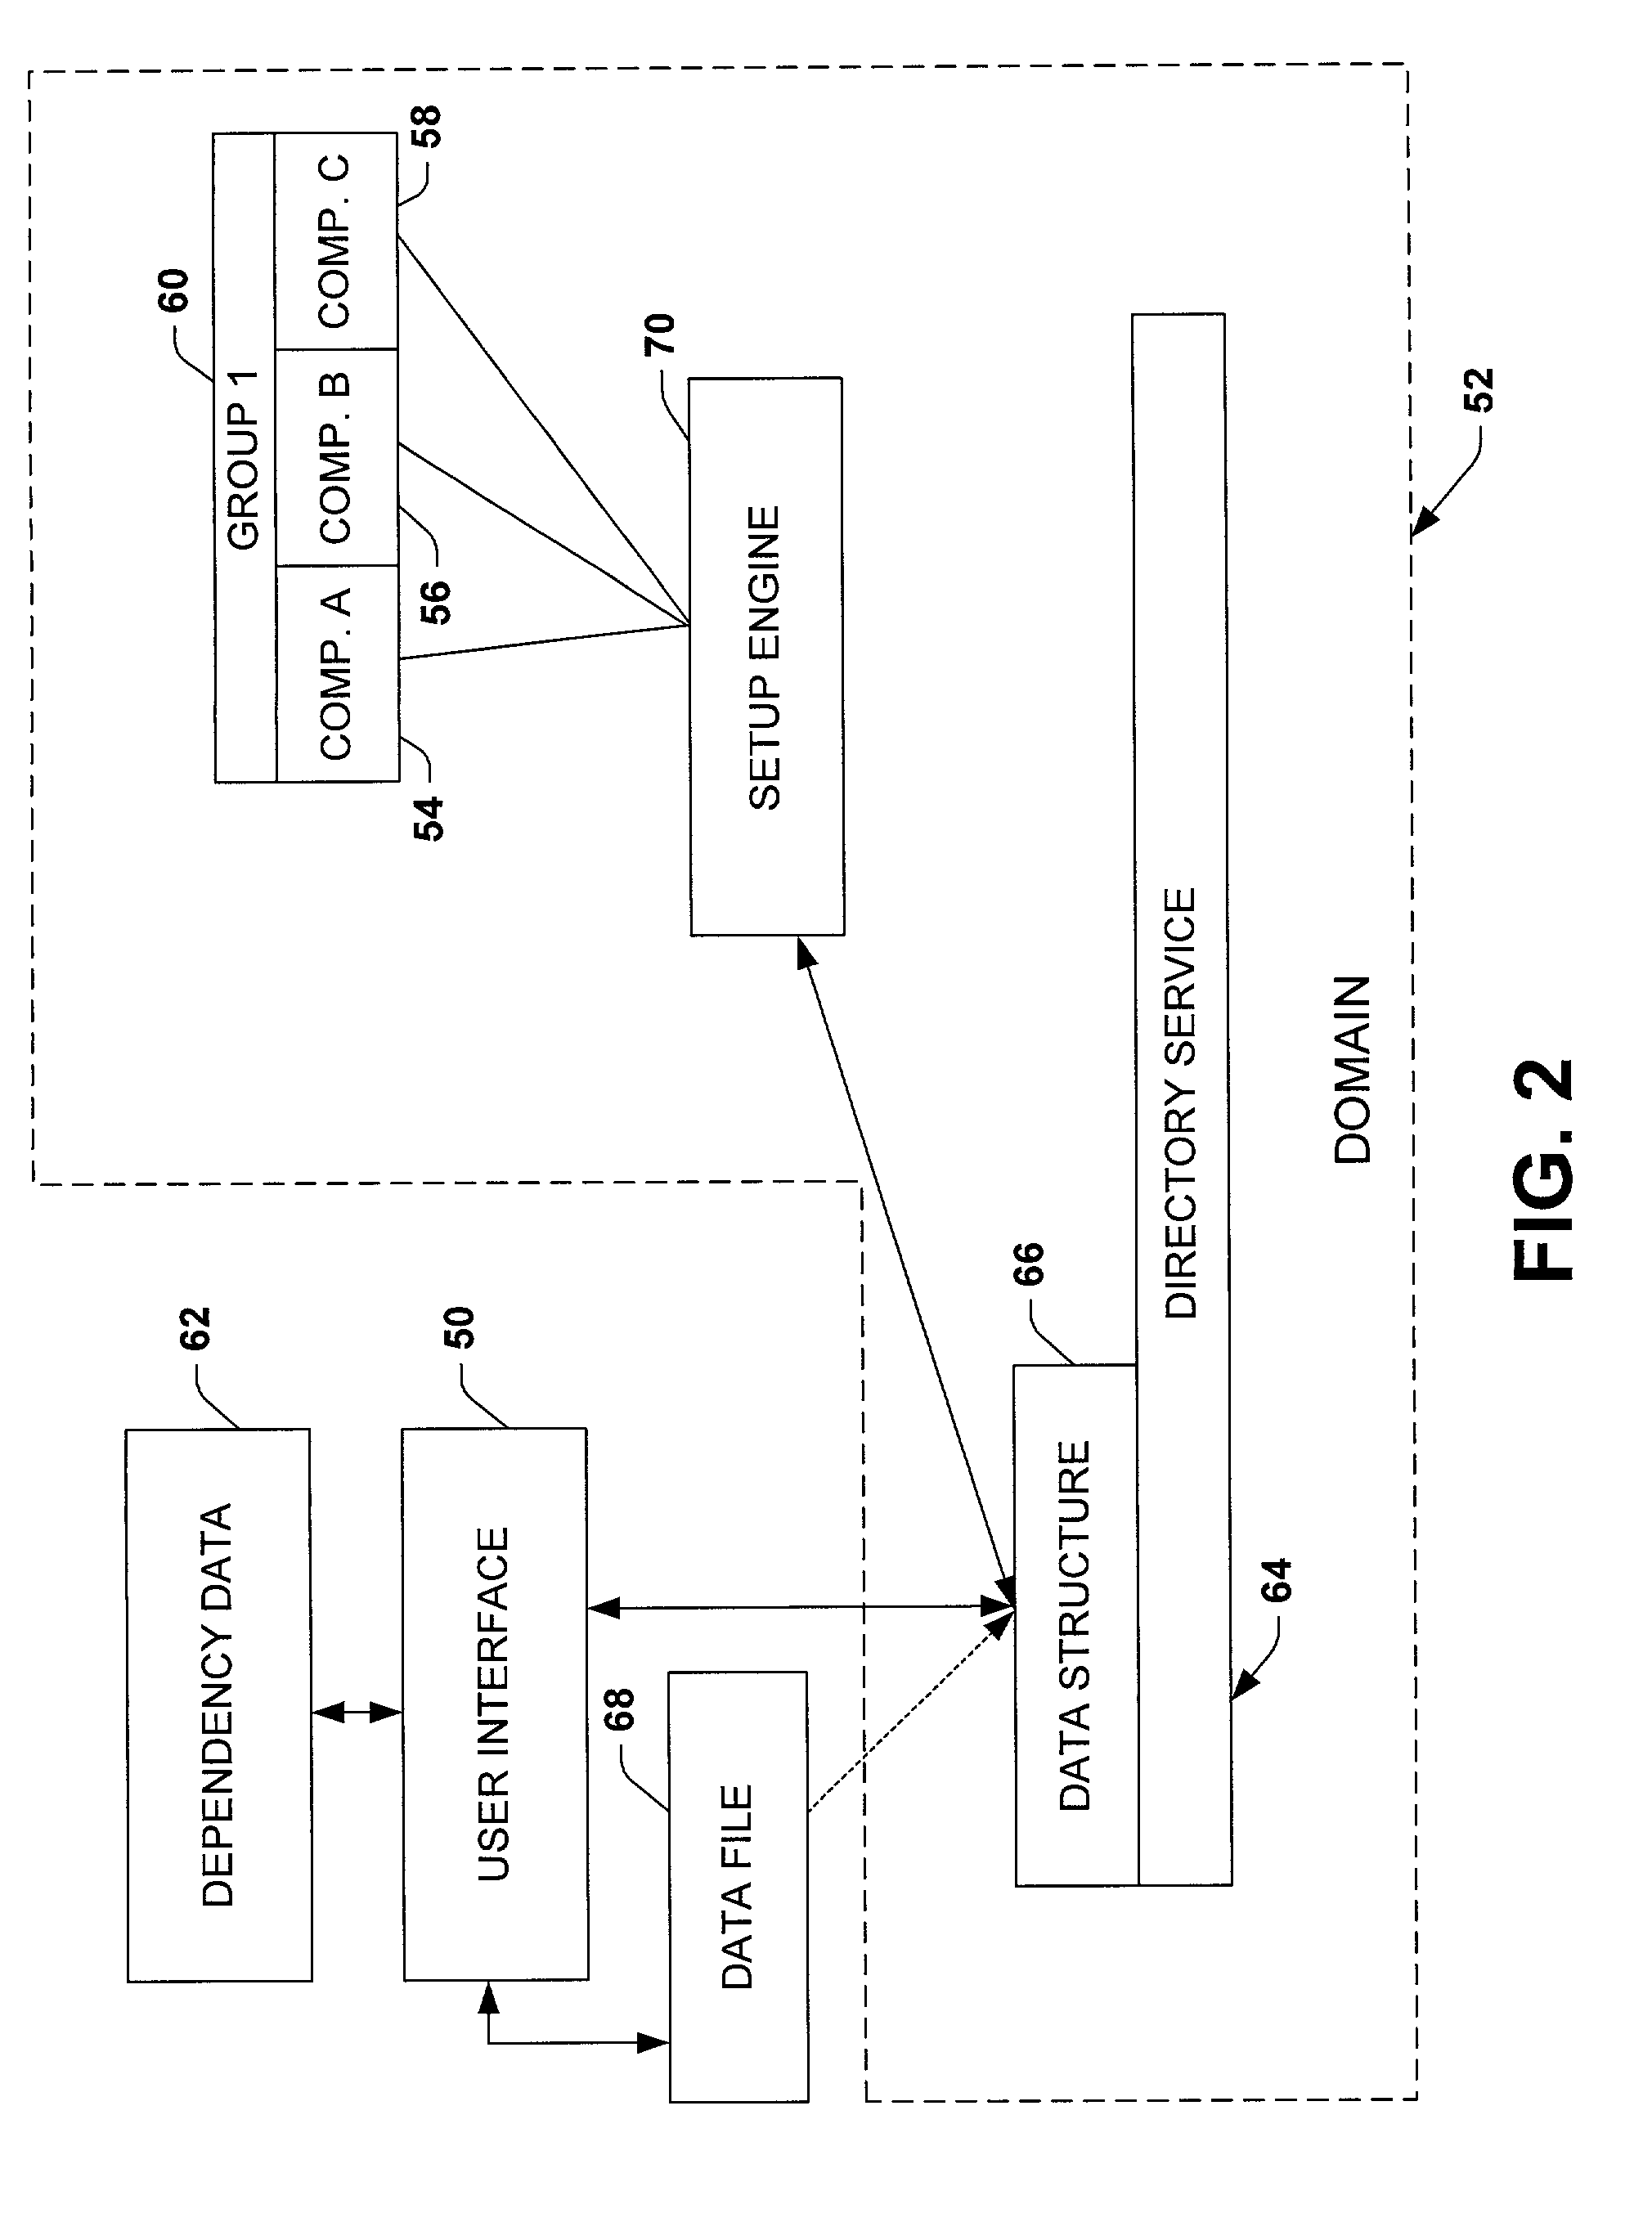 System and method to facilitate installation of components across one or more computers